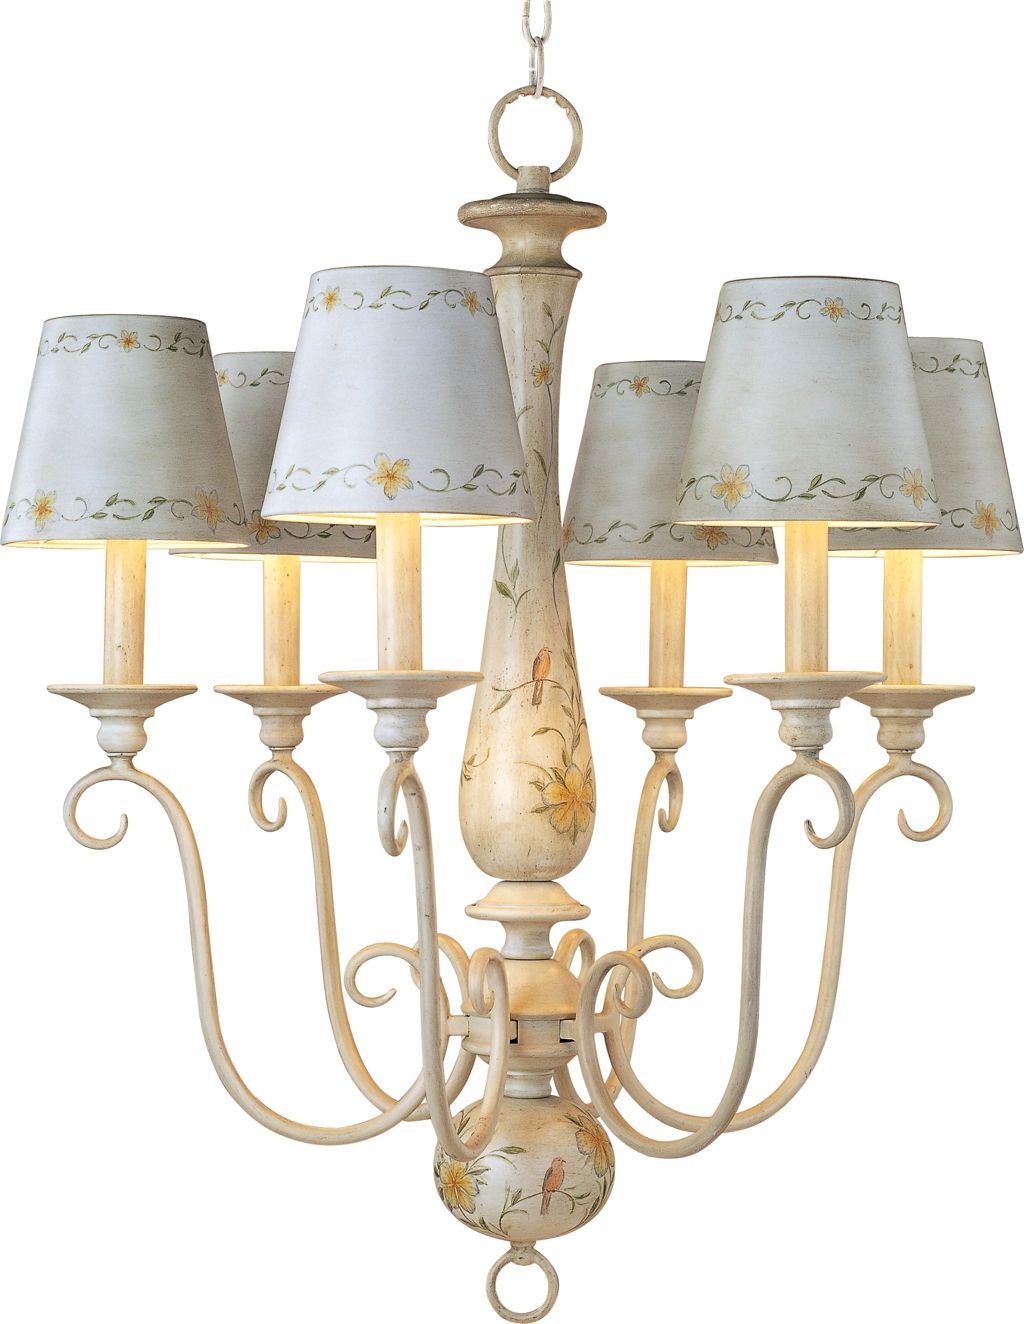 Impressive French Country Chandeliers 27 Country French White Iron Pertaining To Small White Chandeliers (View 25 of 25)